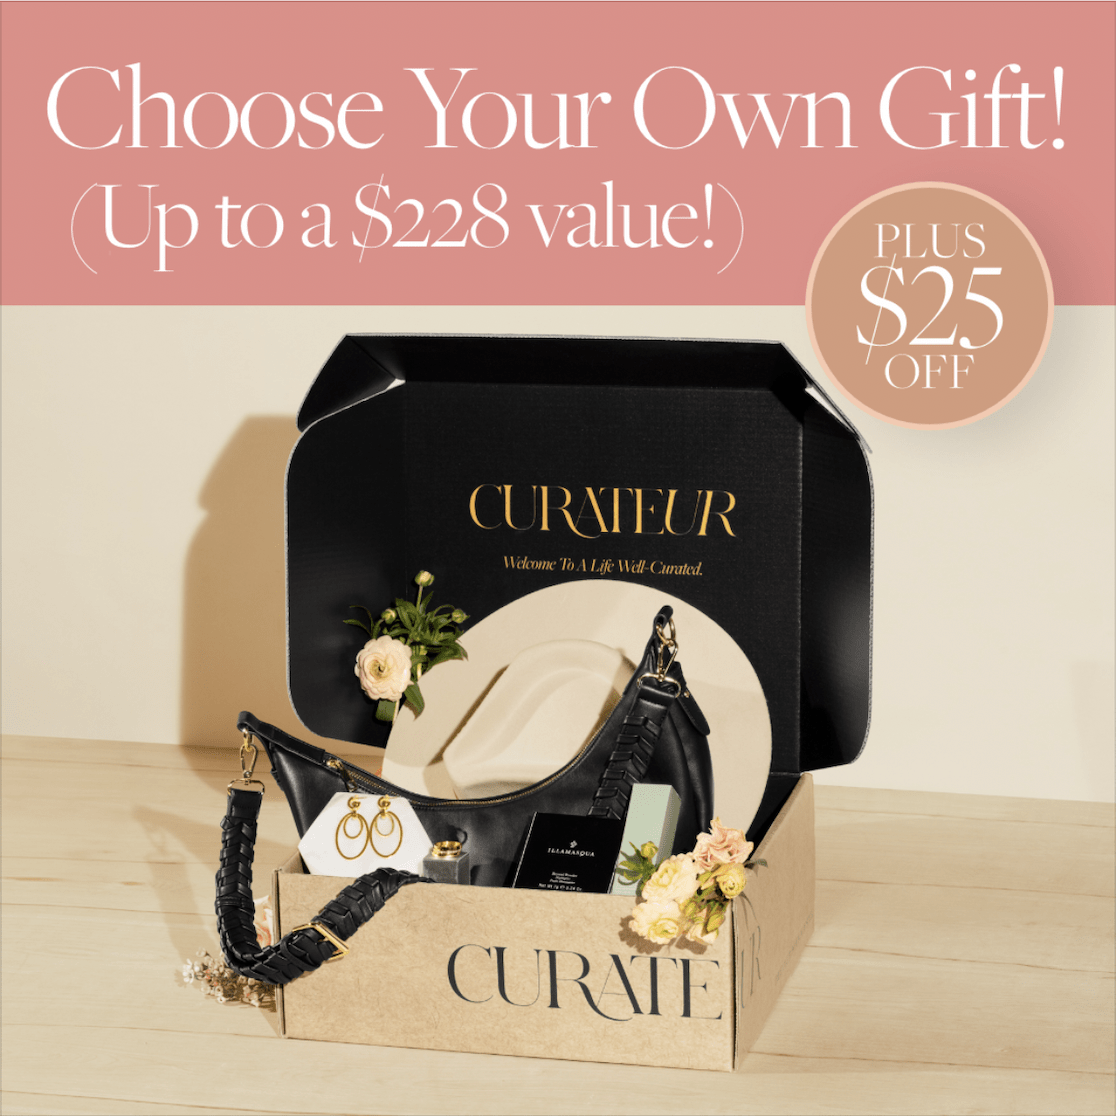 CURATEUR Spring 2021 Coupon Code – Save $25 + Get A FREE Gift